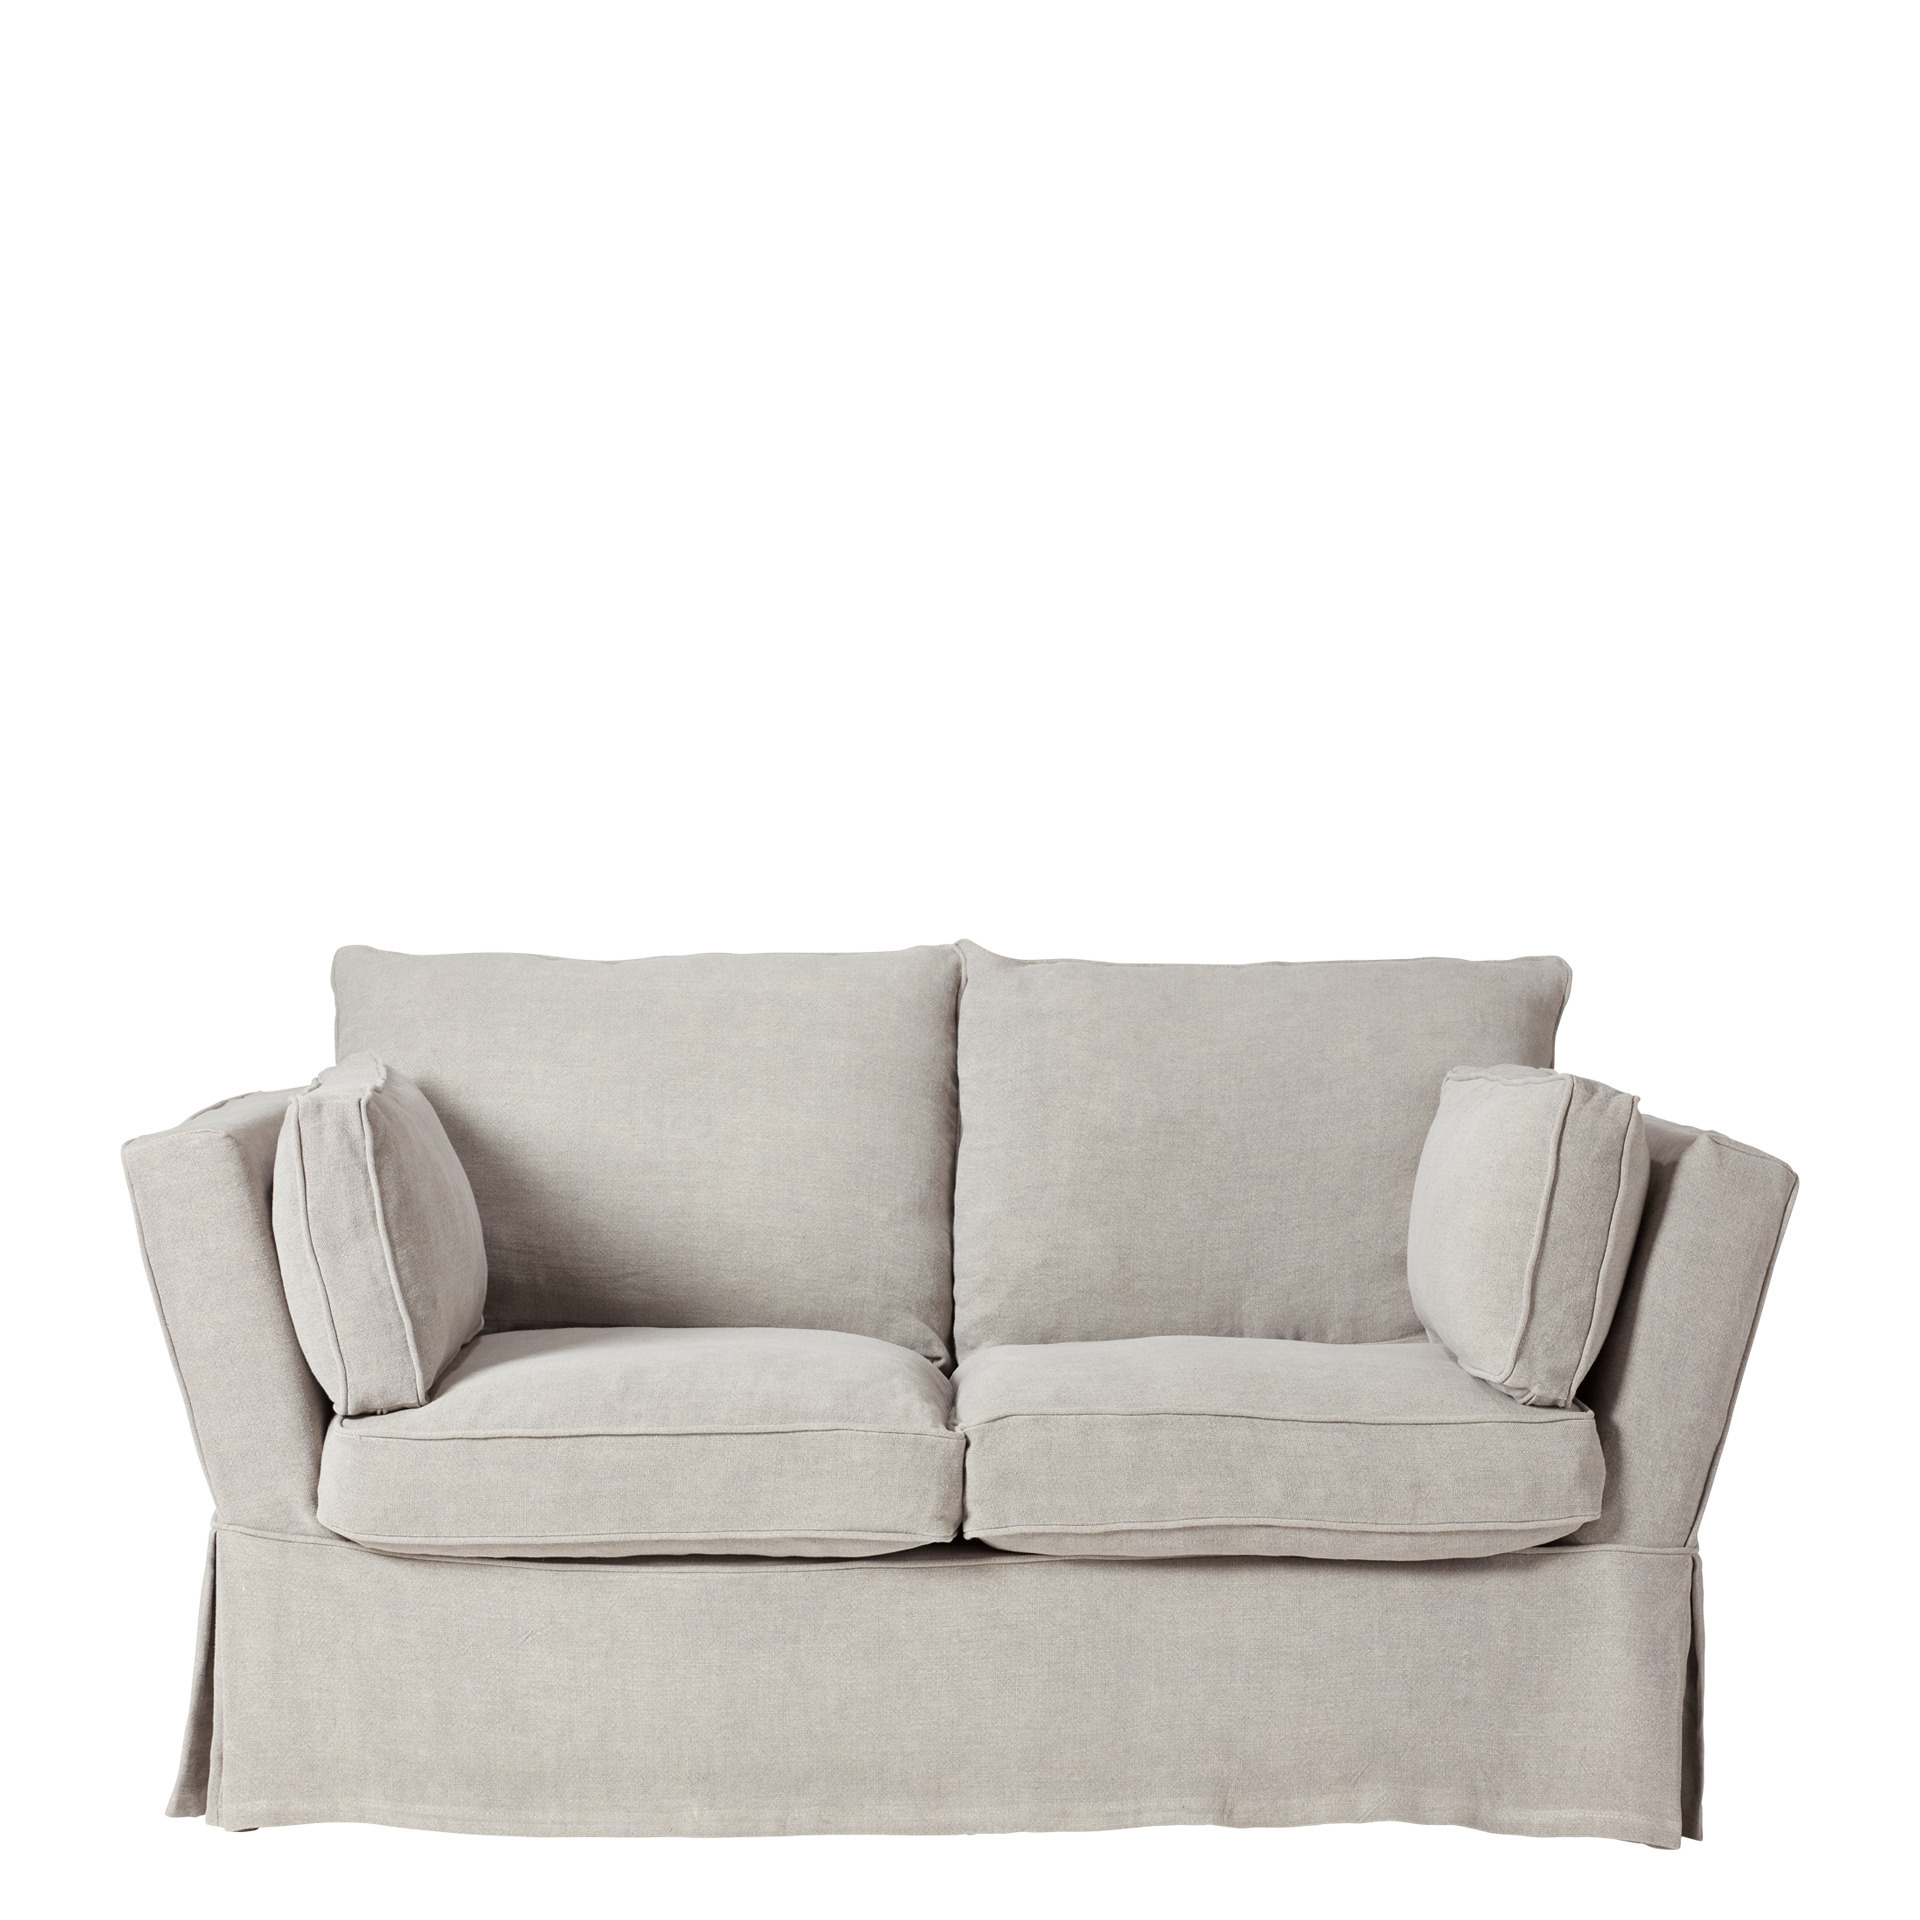 Aubourn 2-Seater Sofa Cover - Silver Grey